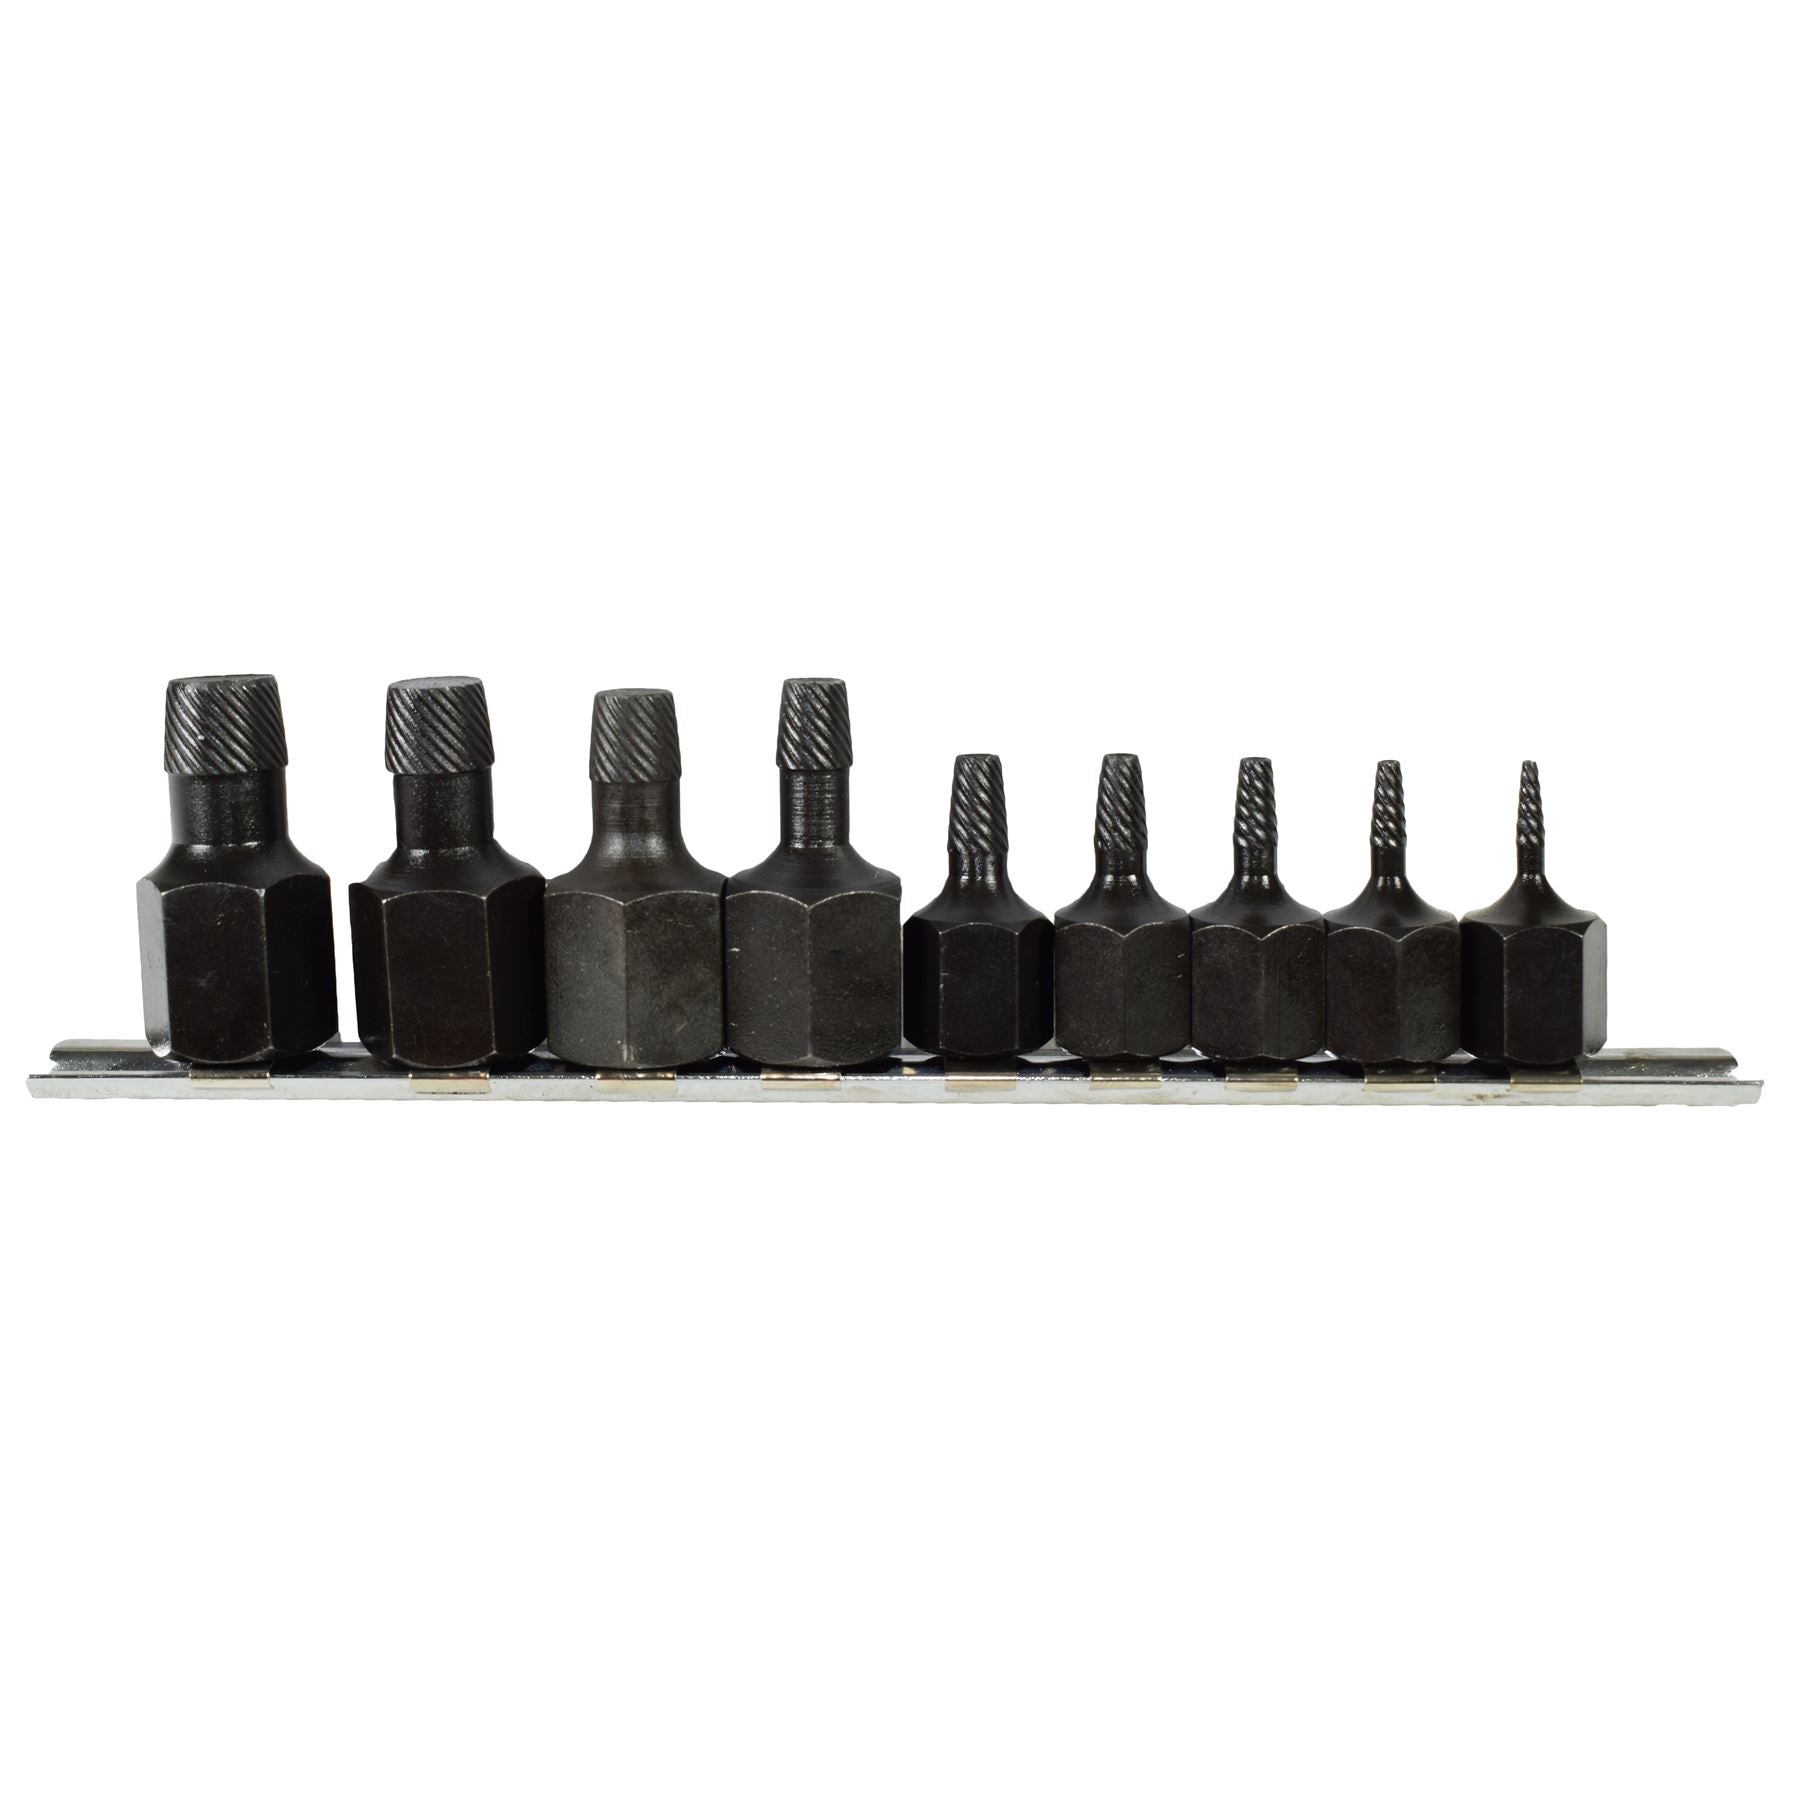 3/8" 1/2" Drive Screw Stud Spiral Extractor Remover Removal Set 2 - 14mm 9pc